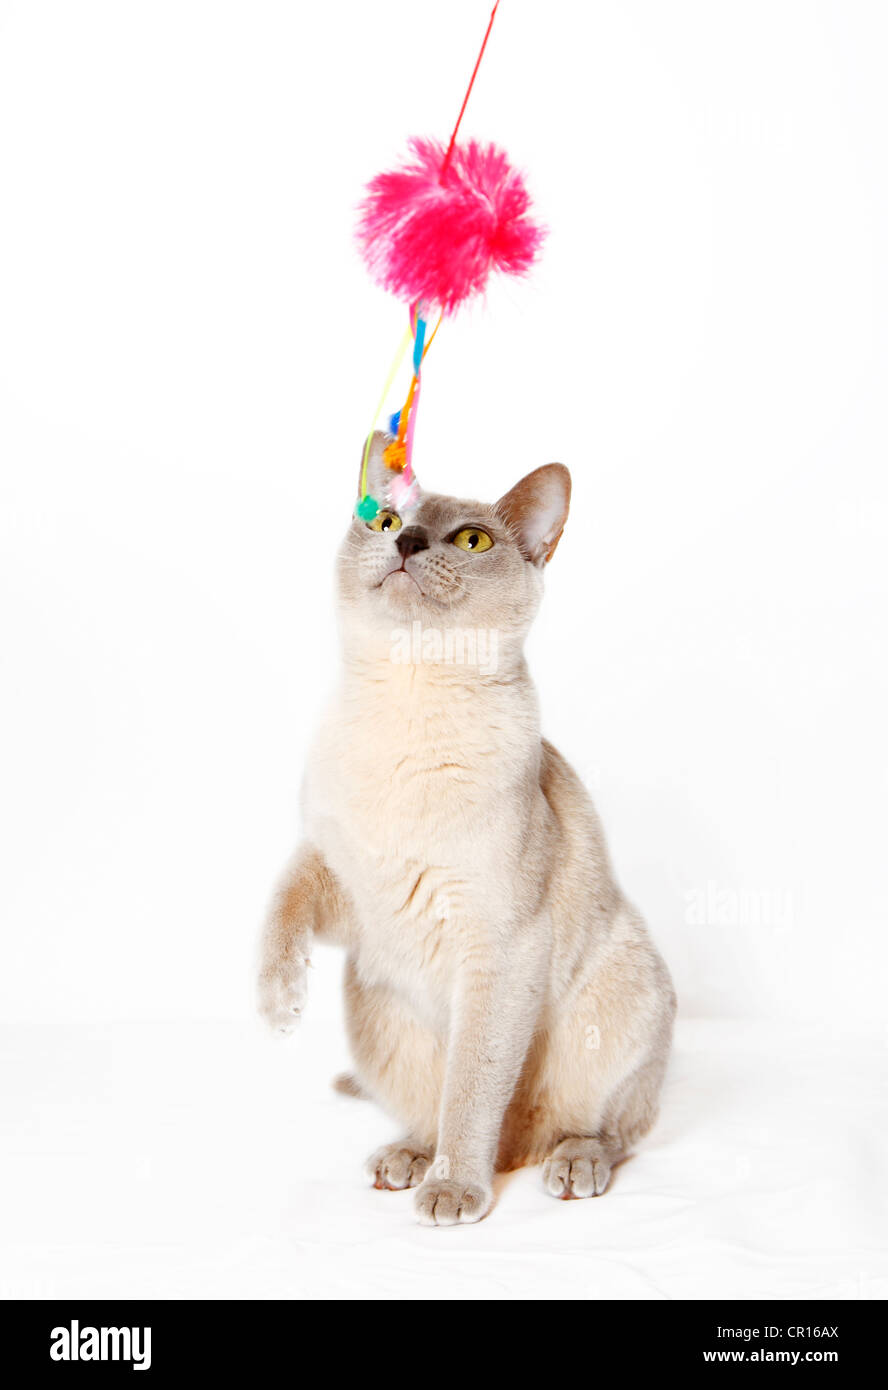 Burmese cat playing with a cat toy Stock Photo